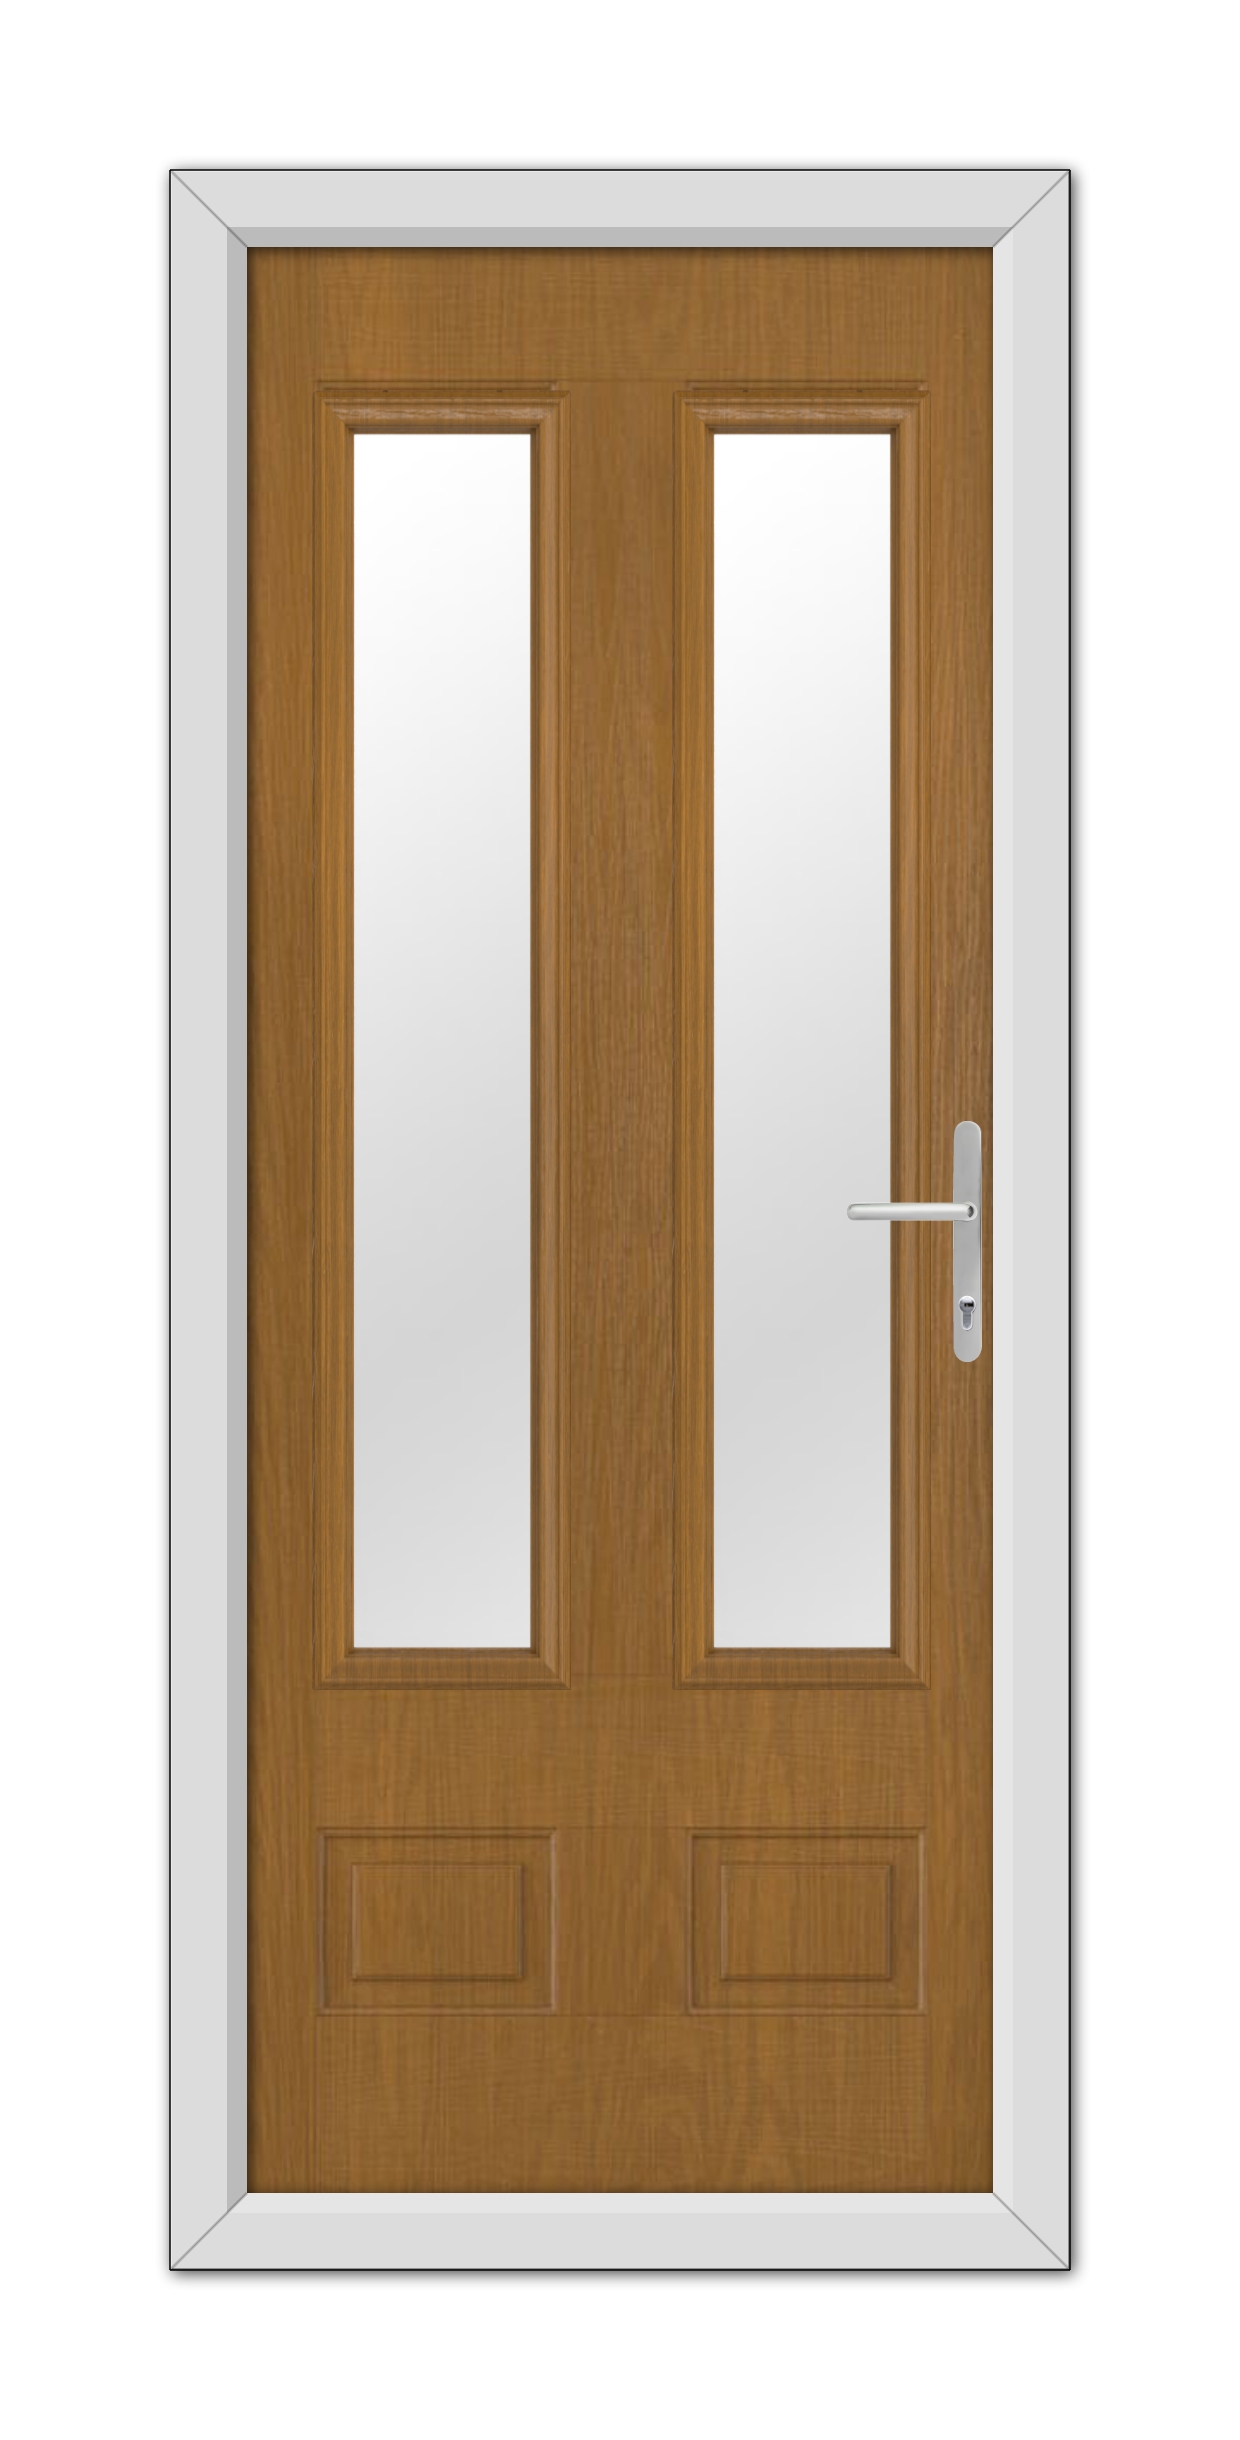 Oak Aston Glazed 2 Composite Door 48mm Timber Core with glass panels and a modern handle, set in a white frame.